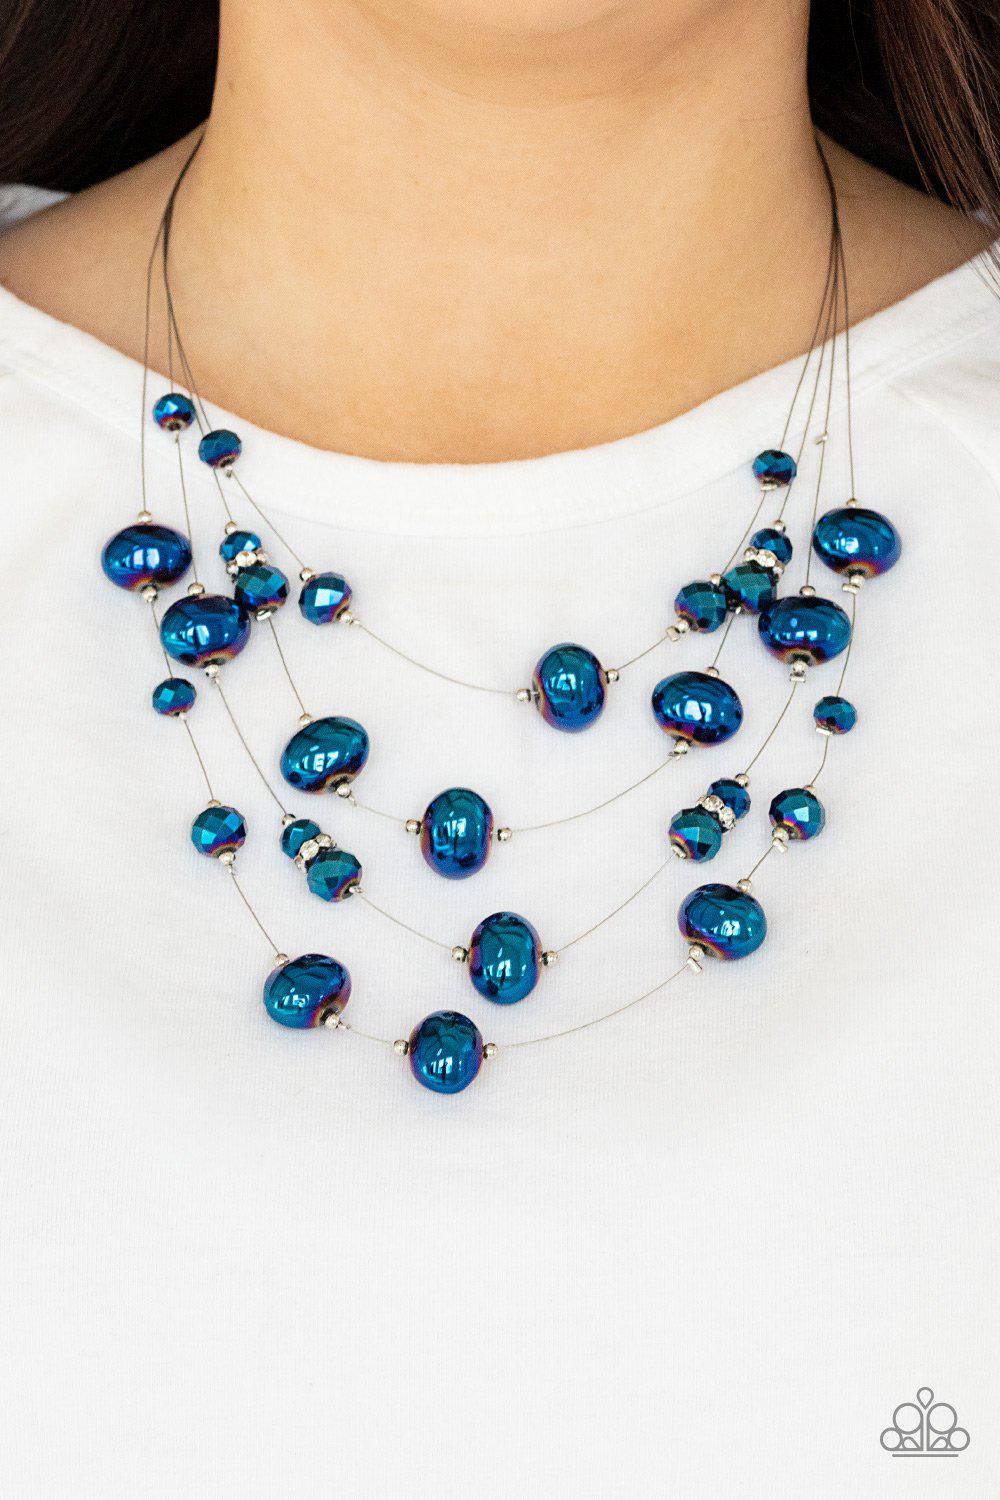 Cosmic Real Estate Metallic Blue &quot;Oil Spill&quot; Necklace - Paparazzi Accessories- model - CarasShop.com - $5 Jewelry by Cara Jewels